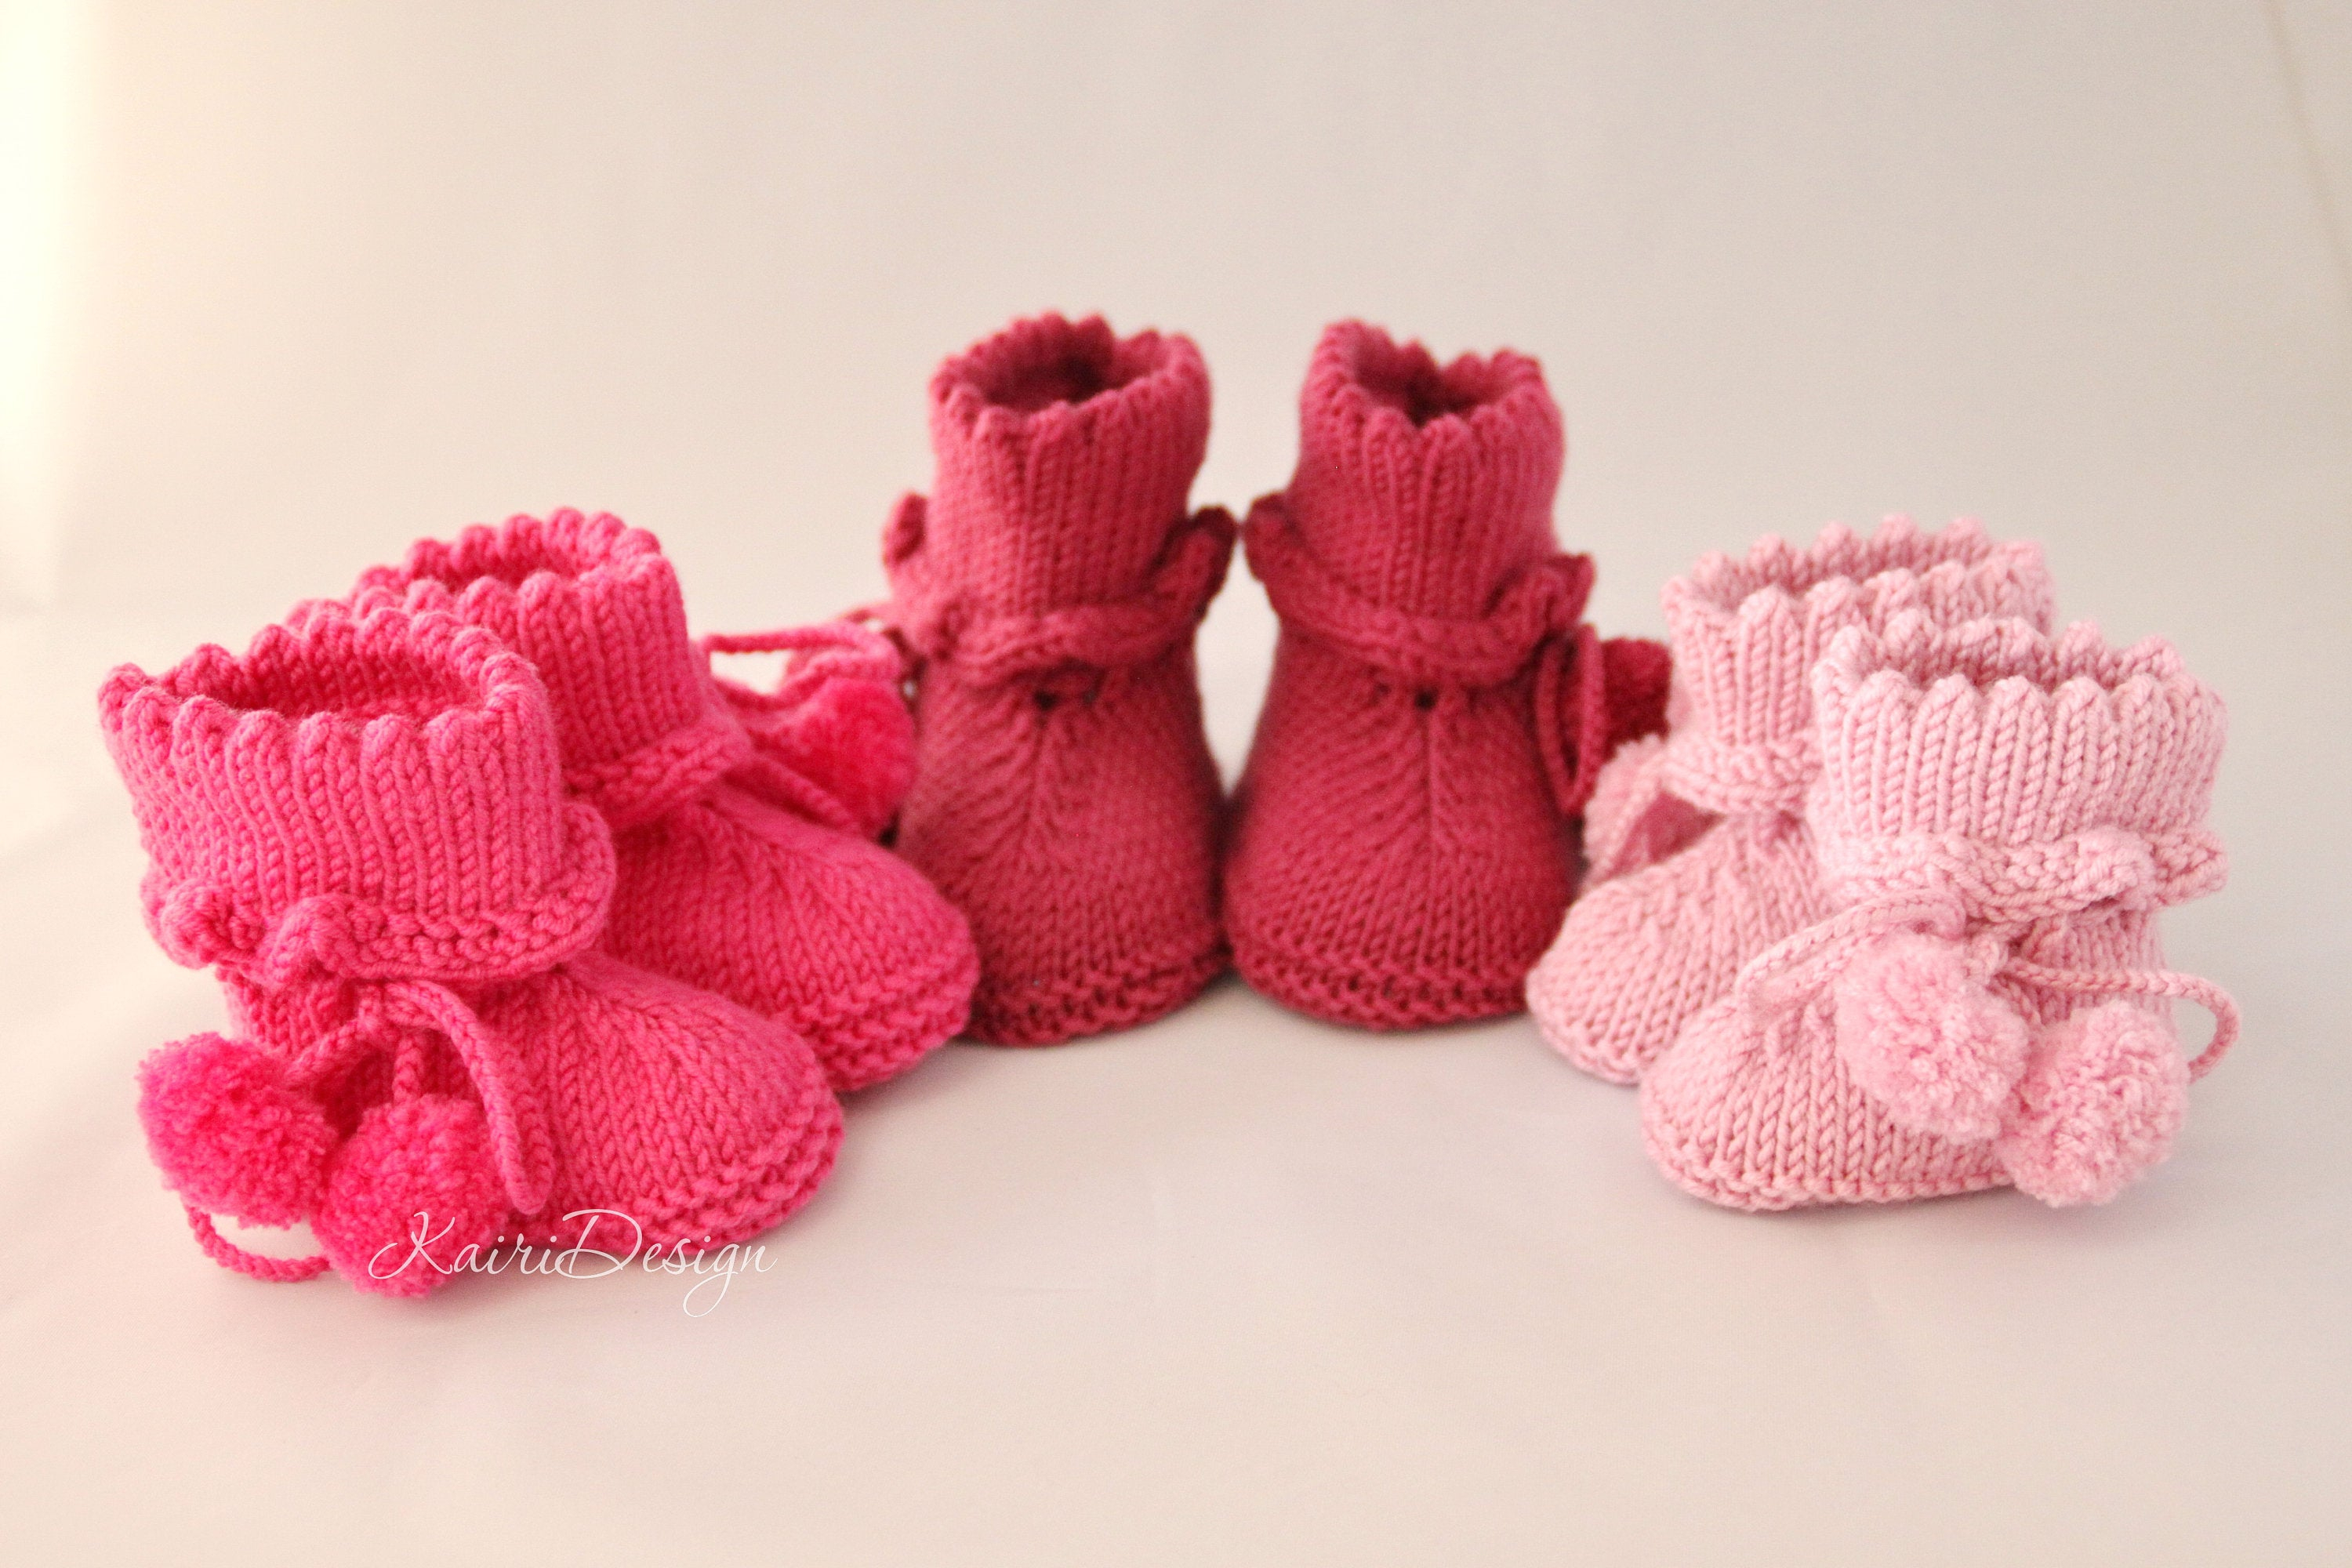 Baby Booties Pattern Knitting Easy Hand Knitting Pattern Ba Booties Easy Knitting For Ba Crib Shoes Knitting For Girl Newborn Reborn Booty Pdf Instruction Accessory